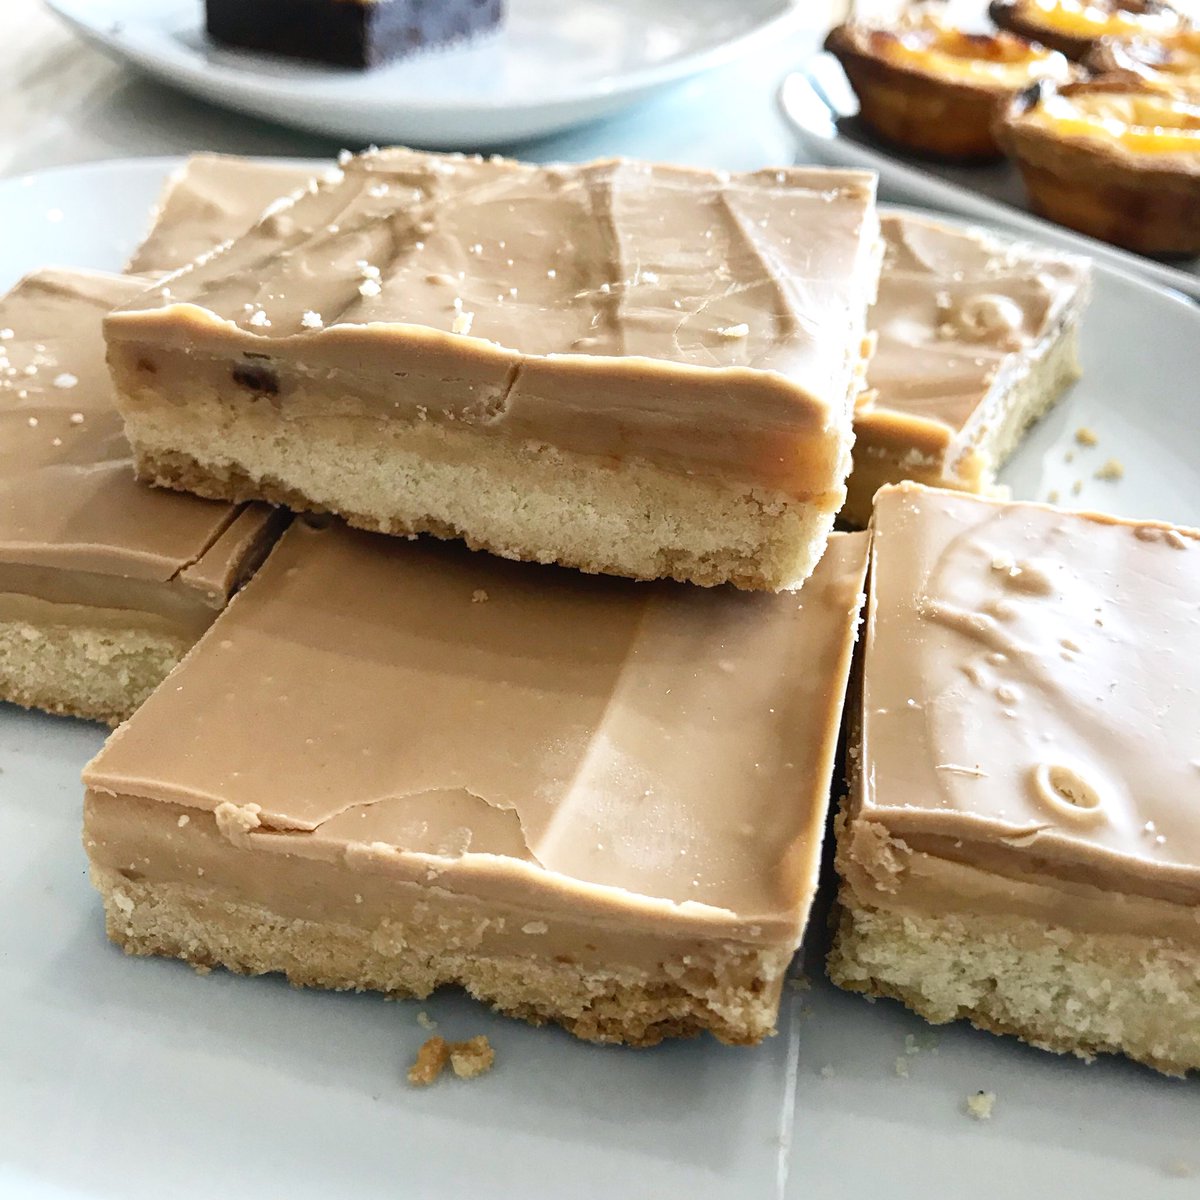 What could be better than millionaire shortbread? Millionaire shortbread with caramelised white chocolate on top! 😍
#eastwittering #cacaobarry #zephyrcaramel #zephyr #millionaire  #millionaireshortbread #caramel #chef #cake #imadeit #makeitdelicious #eattheworld